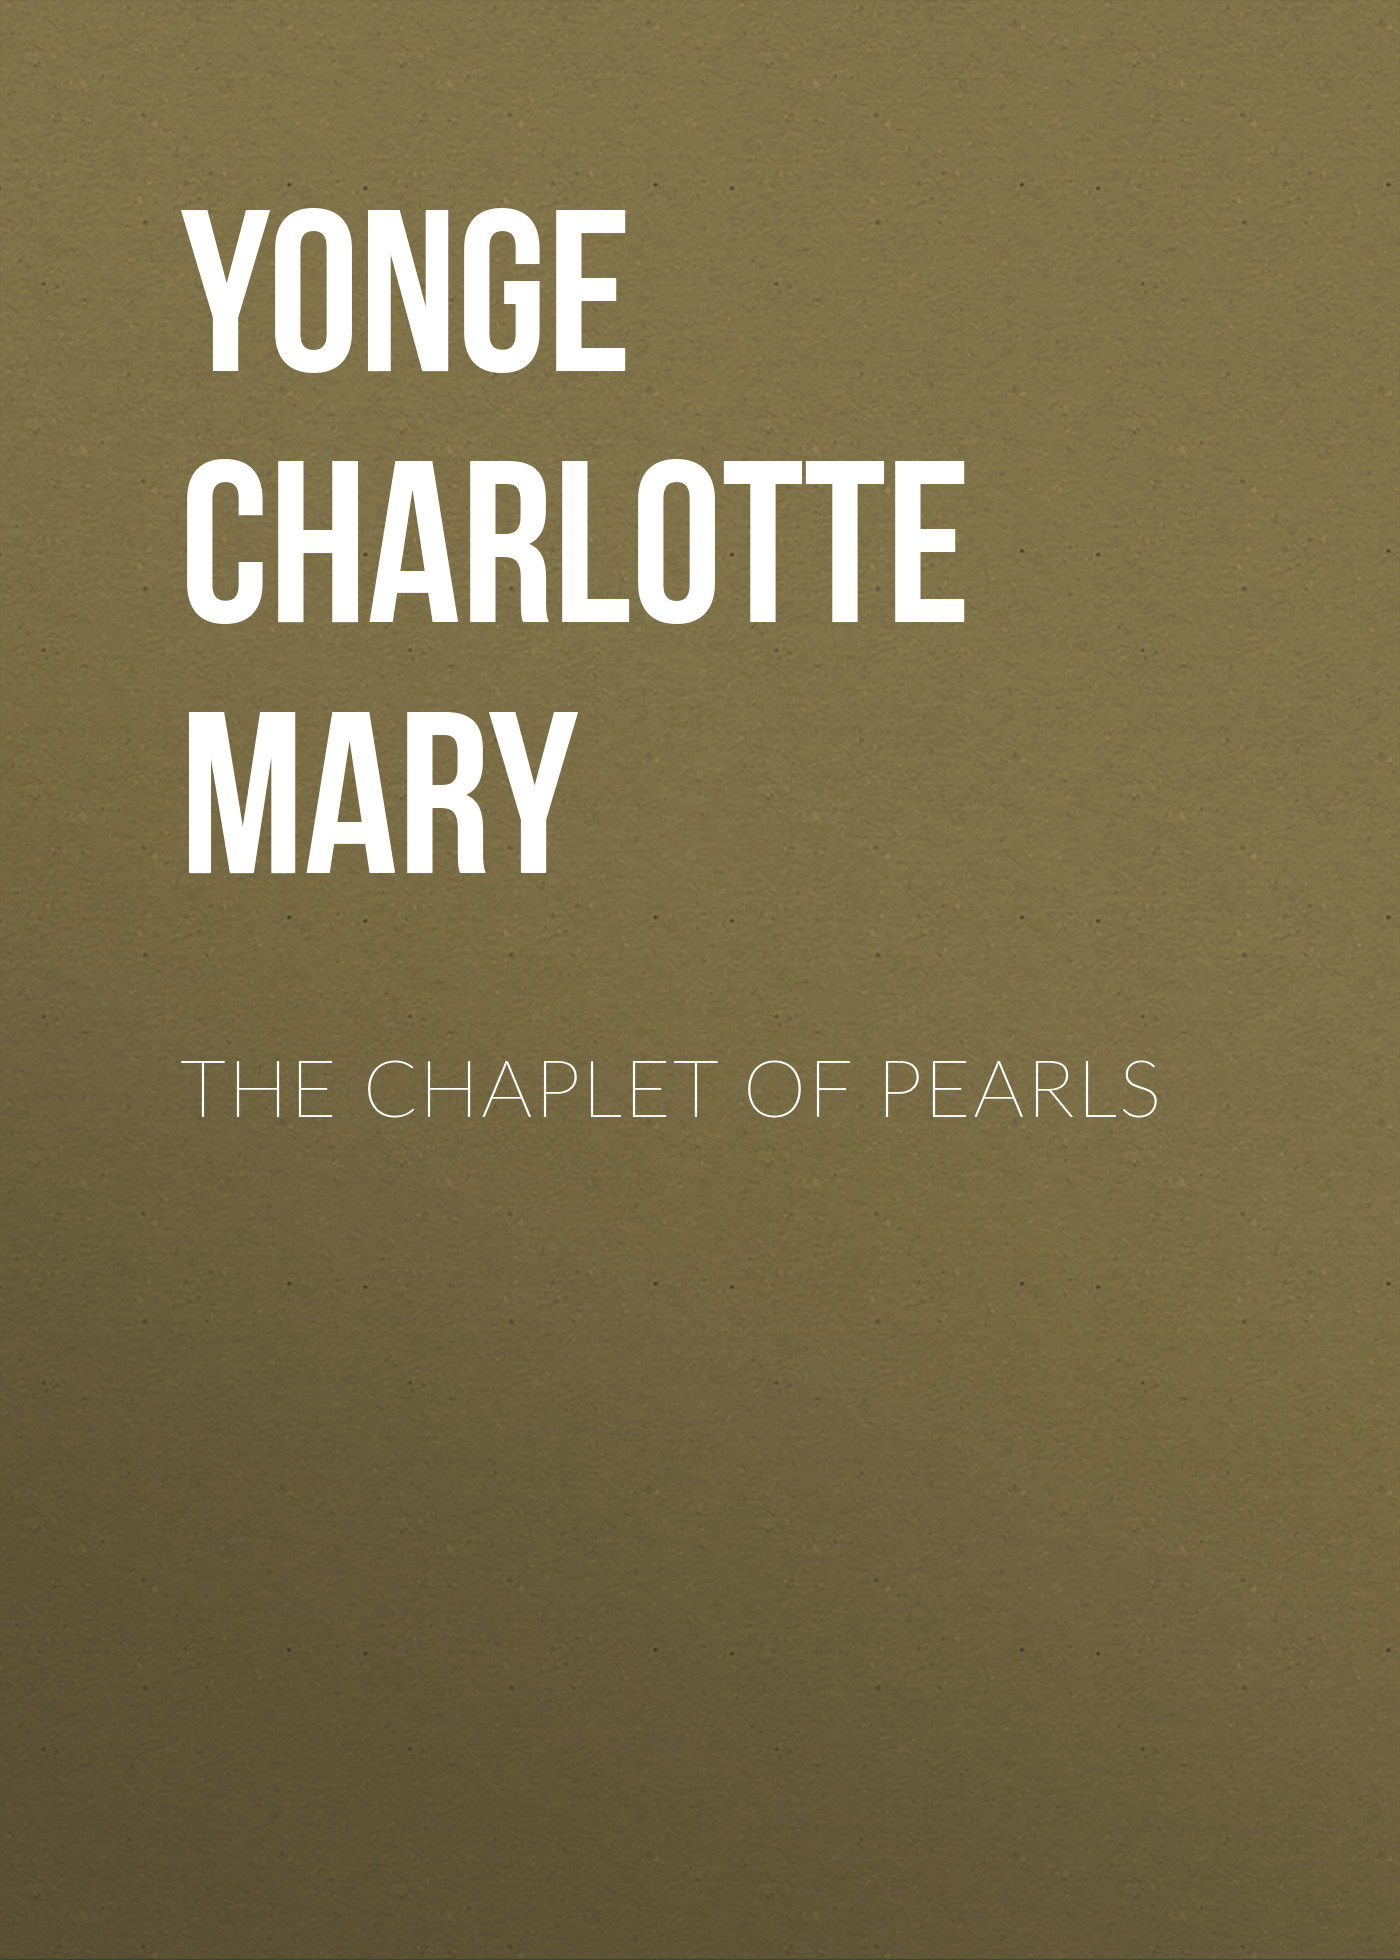 Yonge Charlotte Mary The Chaplet of Pearls